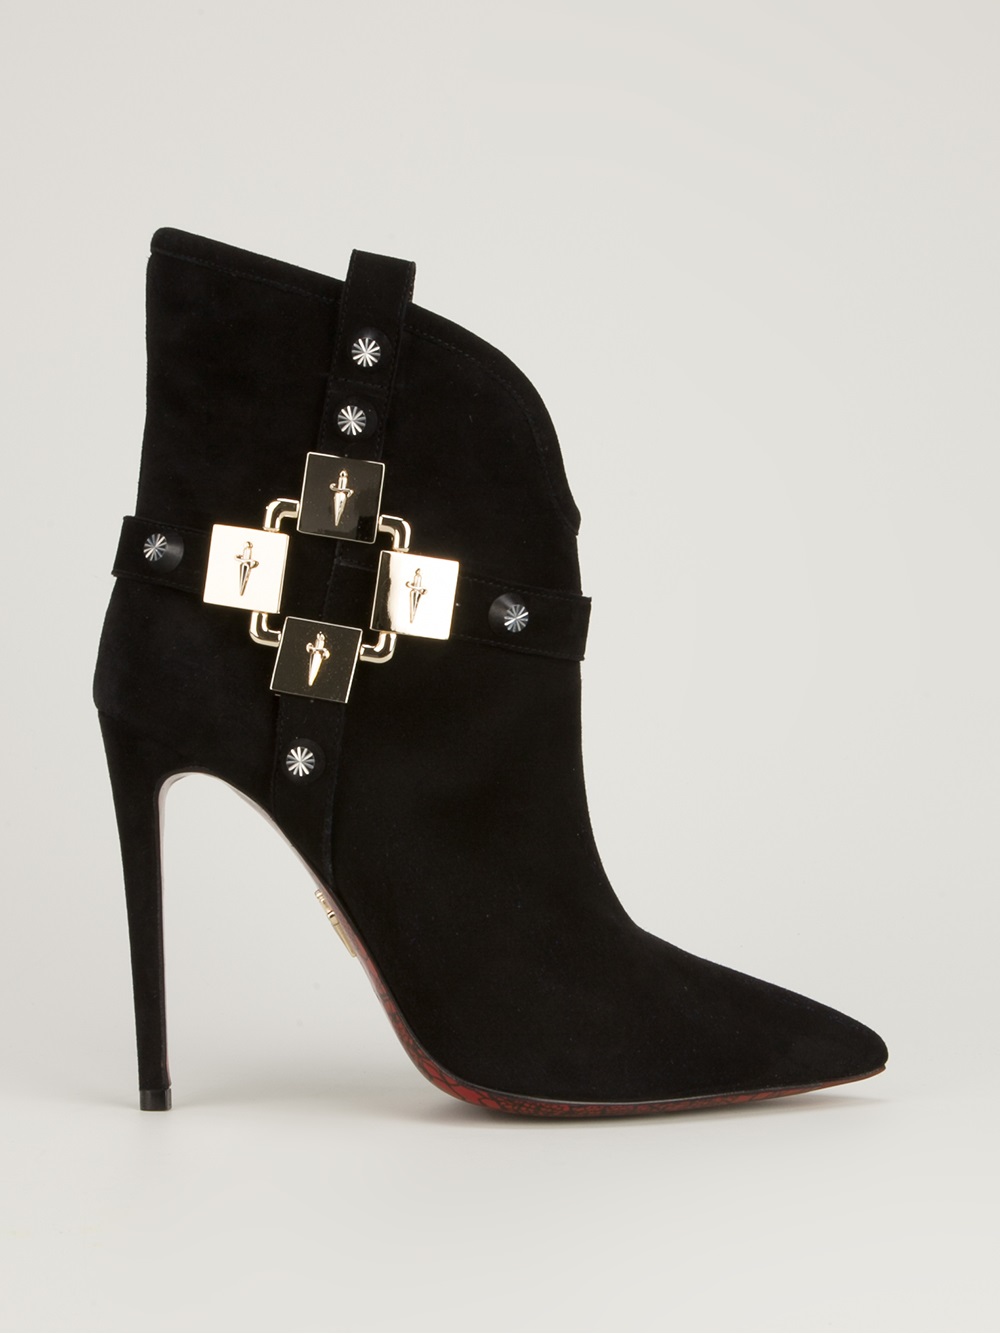 Cesare Paciotti Buckle Ankle Boot in Black - Lyst